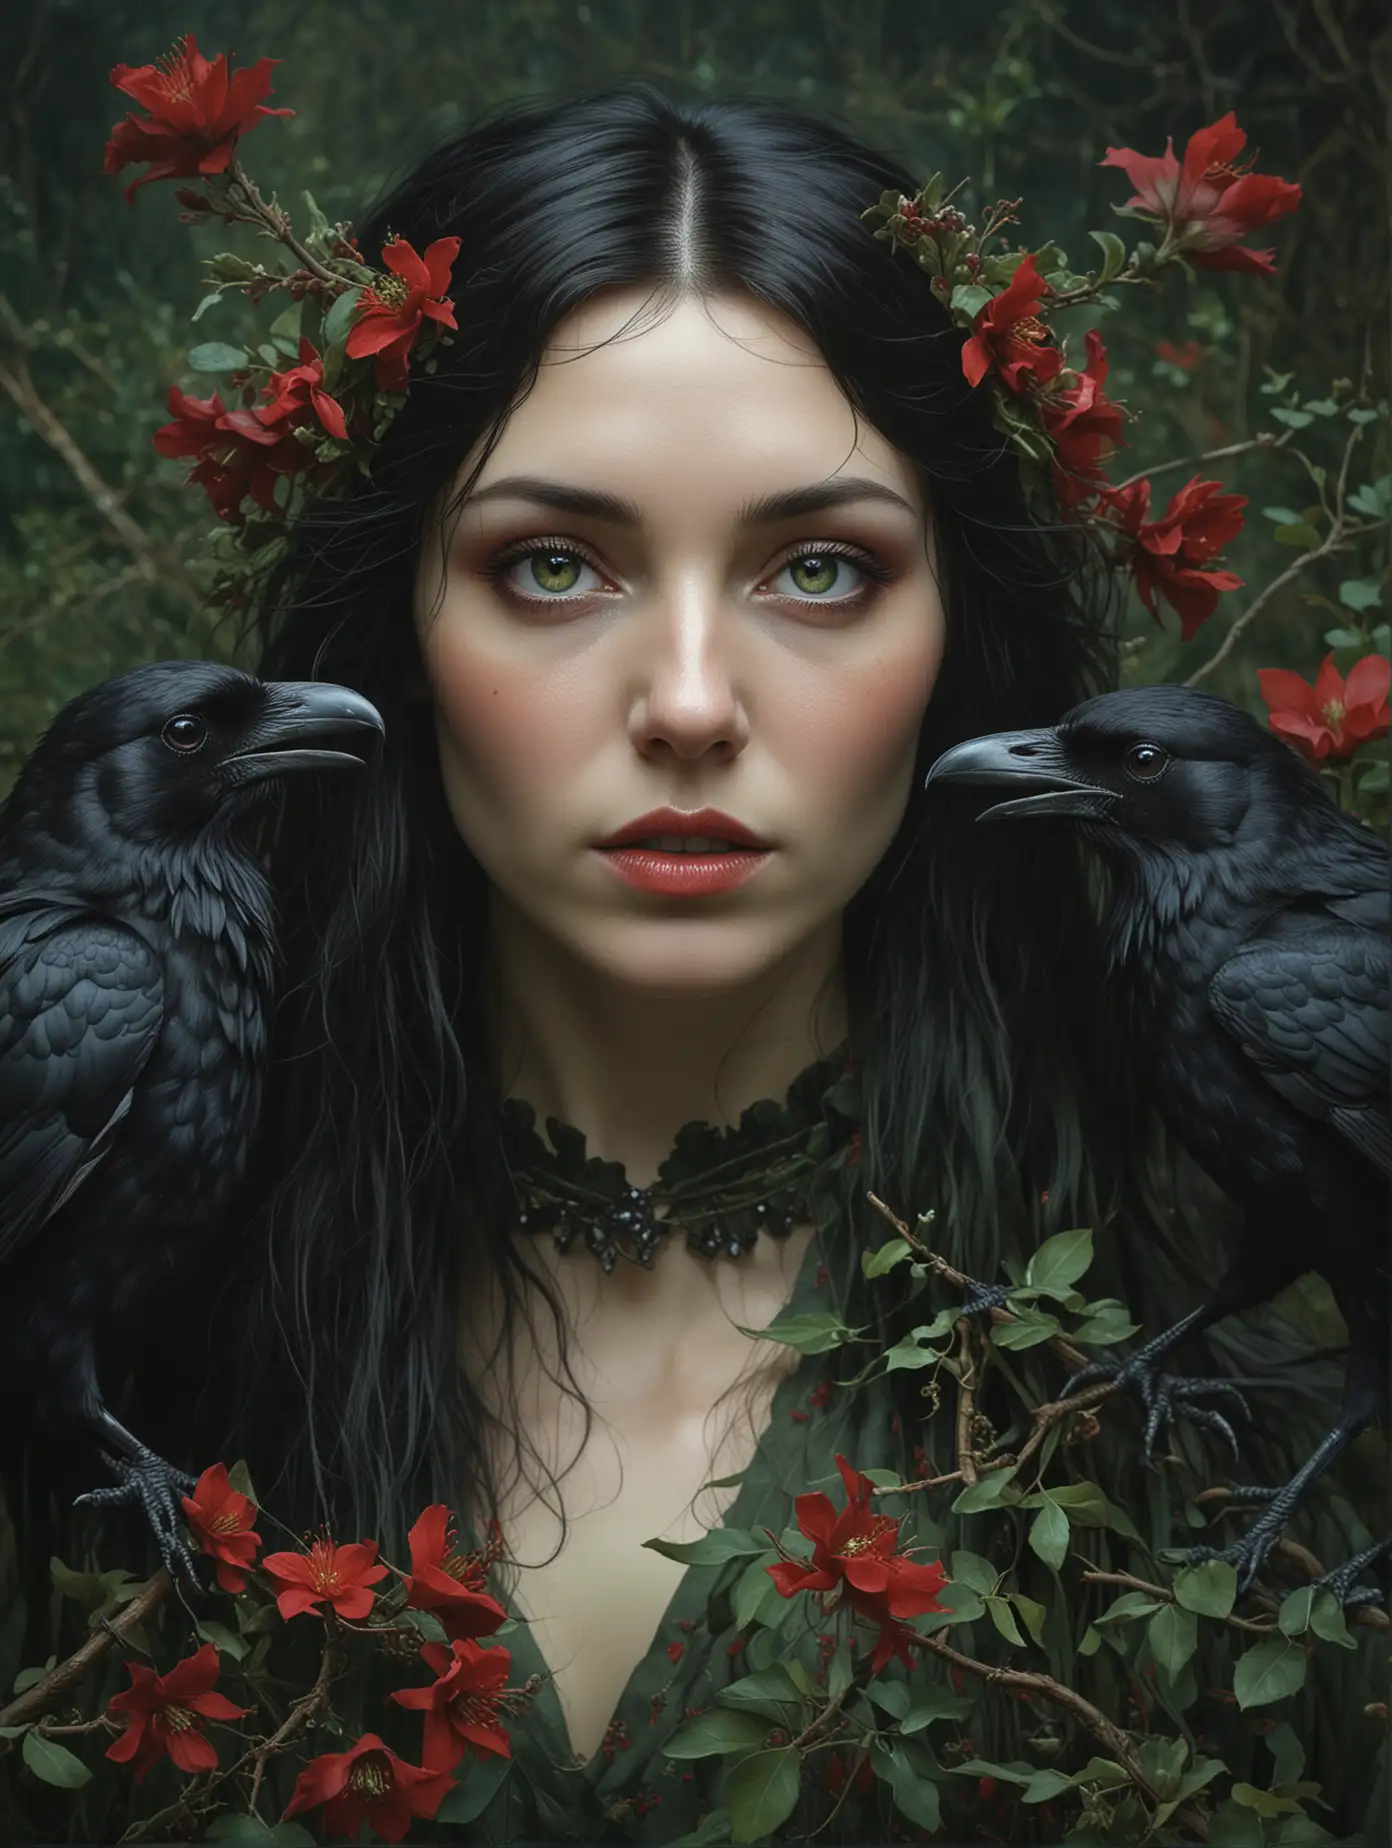 Ophelia, rhiannon, Low saturation colour photography, red and green palette, legendary welsh witch and mystic, black hair, in the legnedary mystical land of the mabinogion, raven, masterful painting in the style of | Marco Mazzoni | Yuri Ivanovich, Todd McFarlane, Aleksi Briclot, oil on canvas, highly detailed